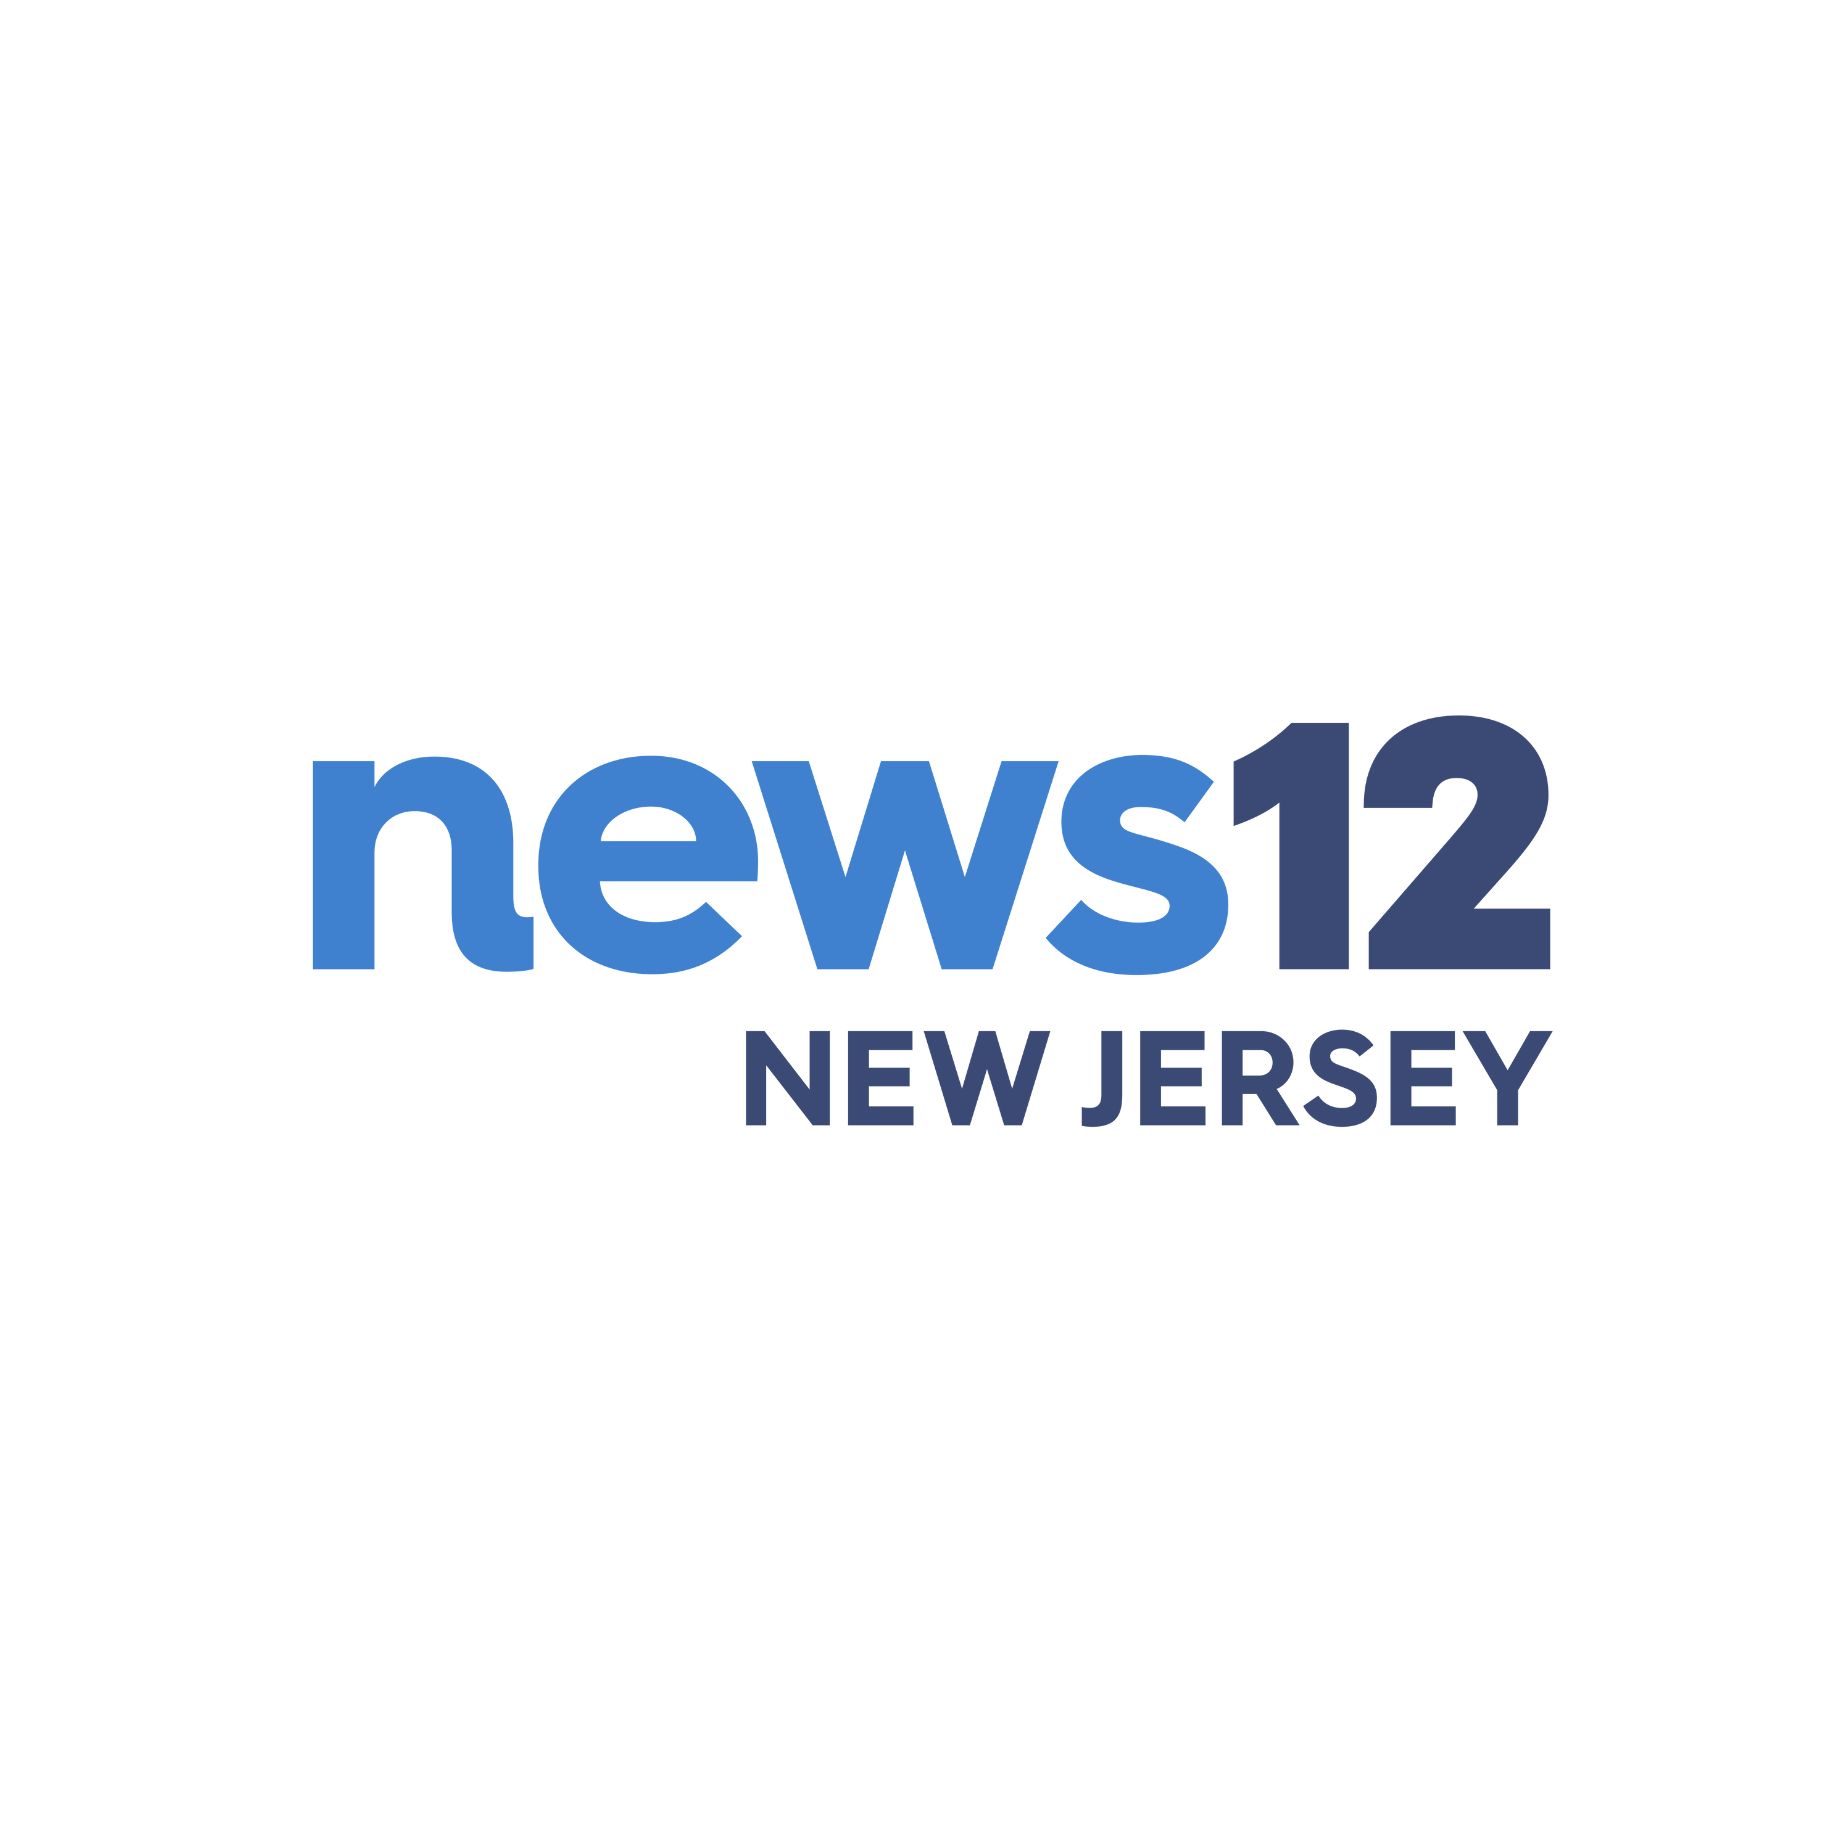 Table to Table was featured on News 12 New Jersey recently.